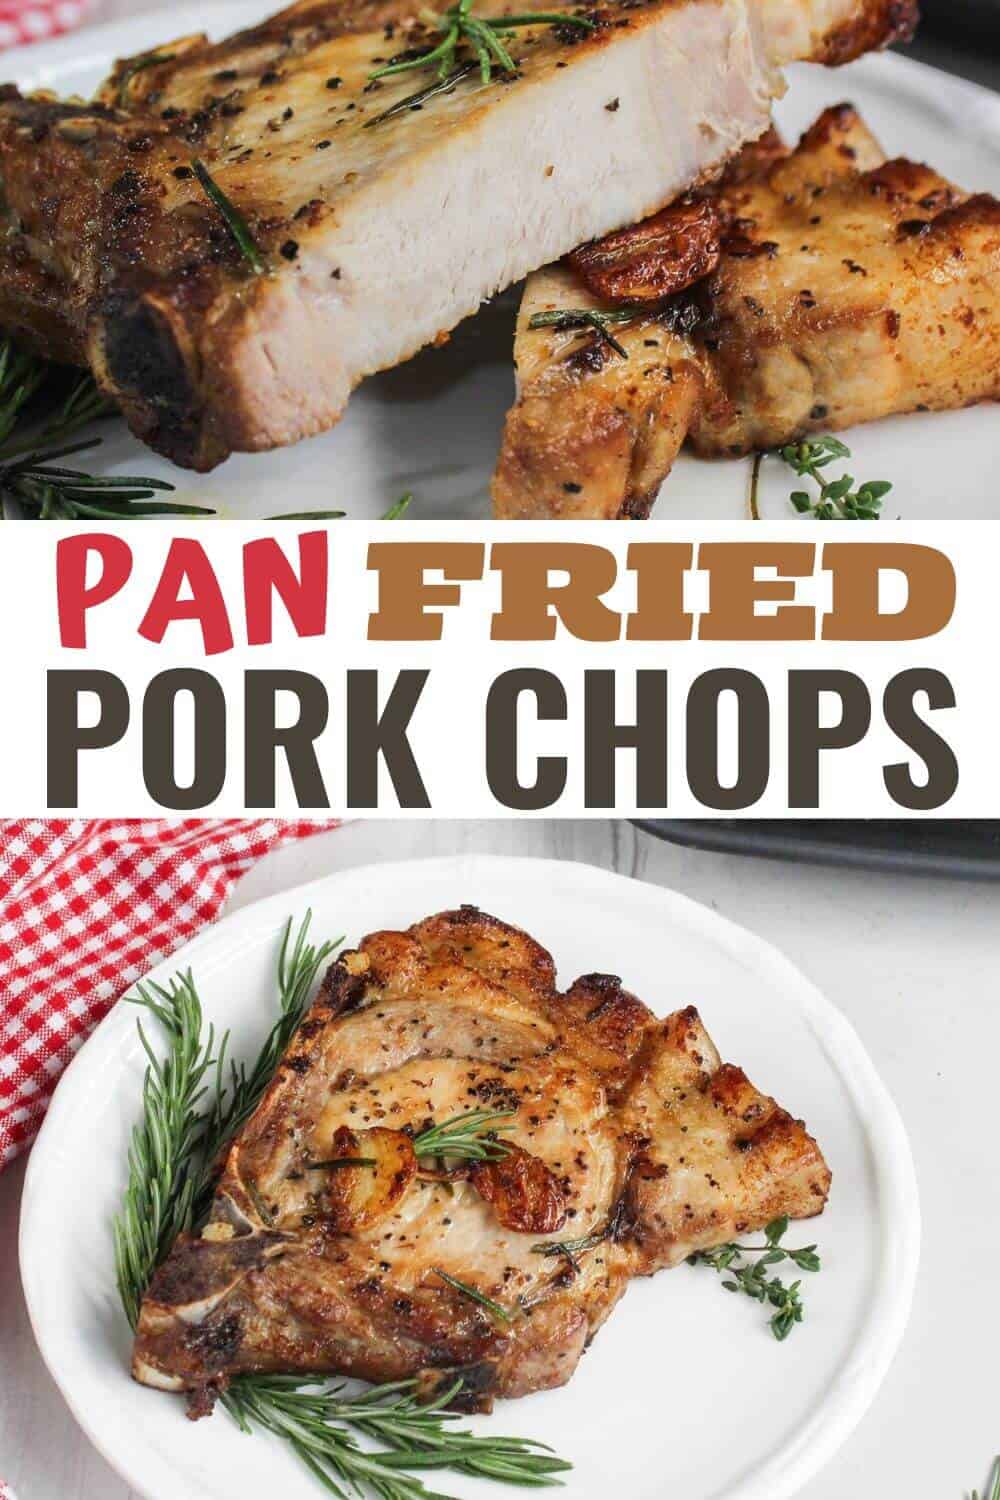 Pan fried pork chops on a plate with rosemary.